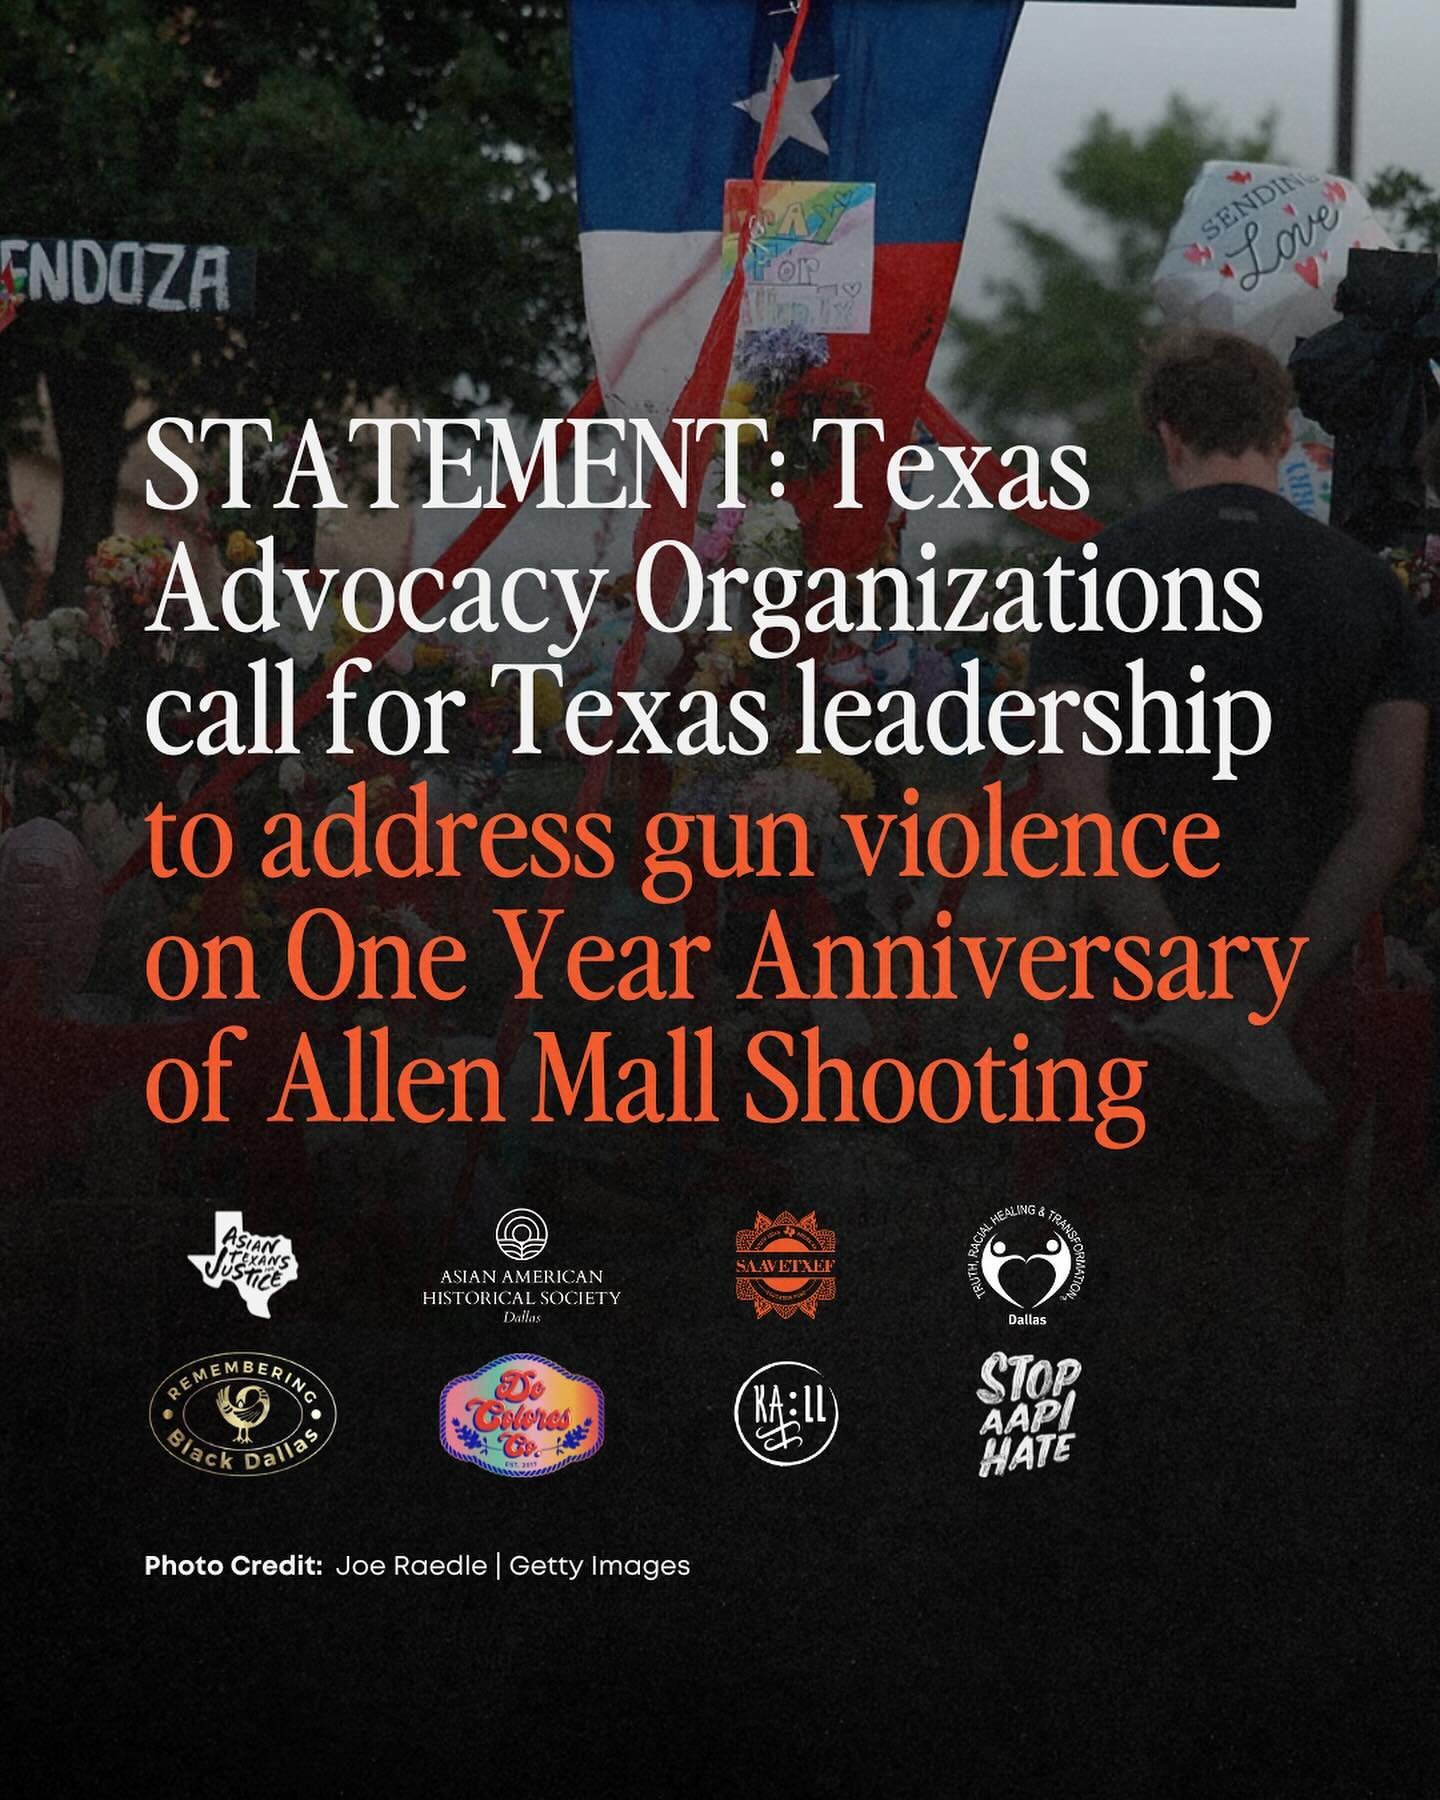 One year later: May 6, 2024, marks the solemn anniversary of the Allen Mall Shooting in which a gunman took the lives of eight people, four of whom were of Asian descent, in Allen, Texas.

As a united front, @asiantexansforjustice @dallasasianhistory